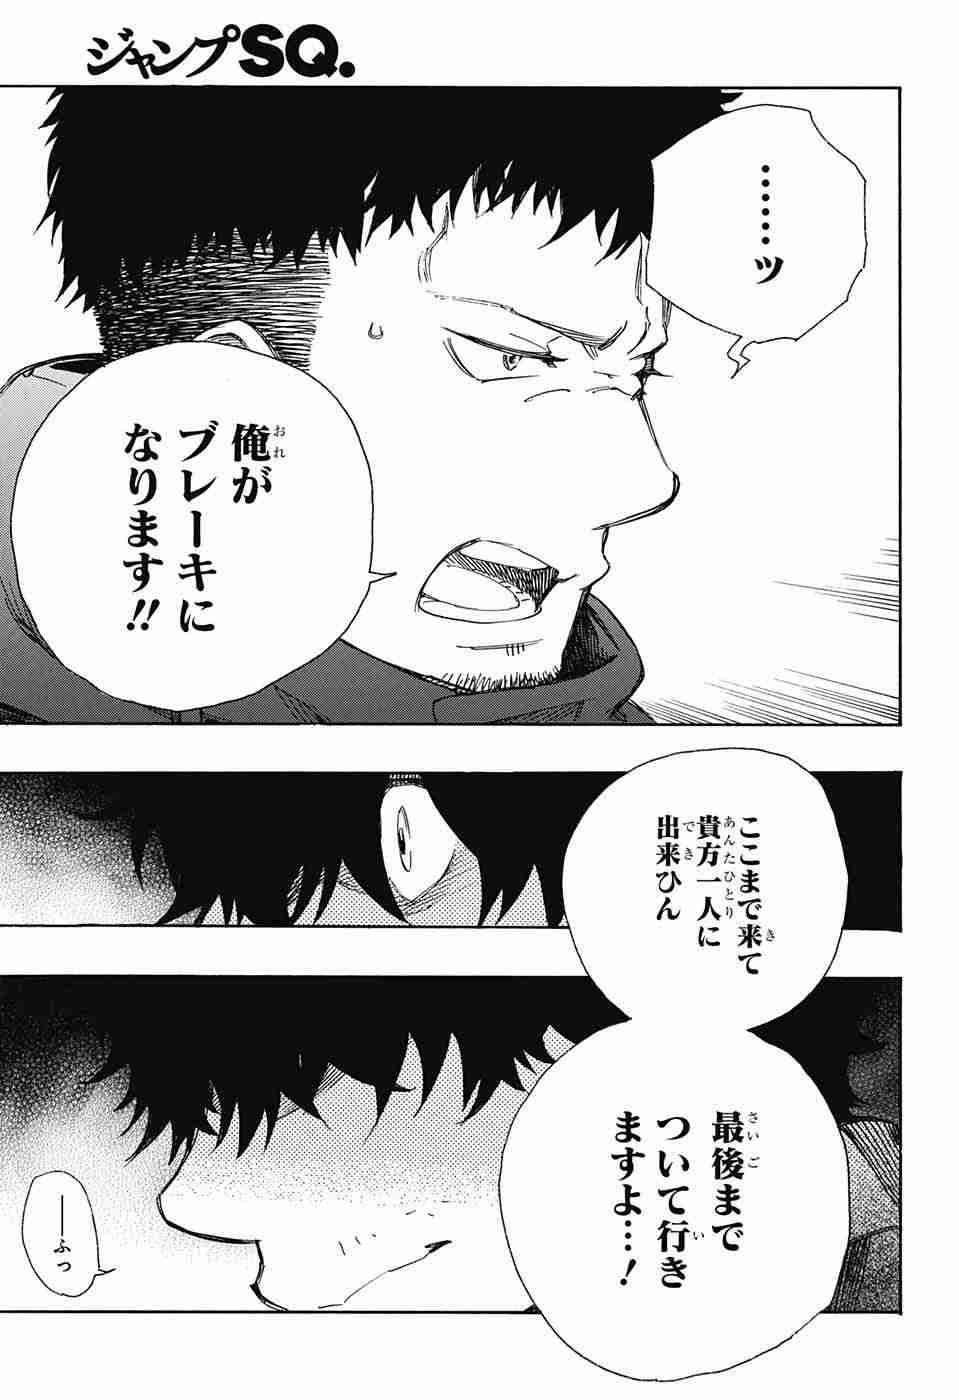 Ao no Exorcist - Chapter 84 - Page 33